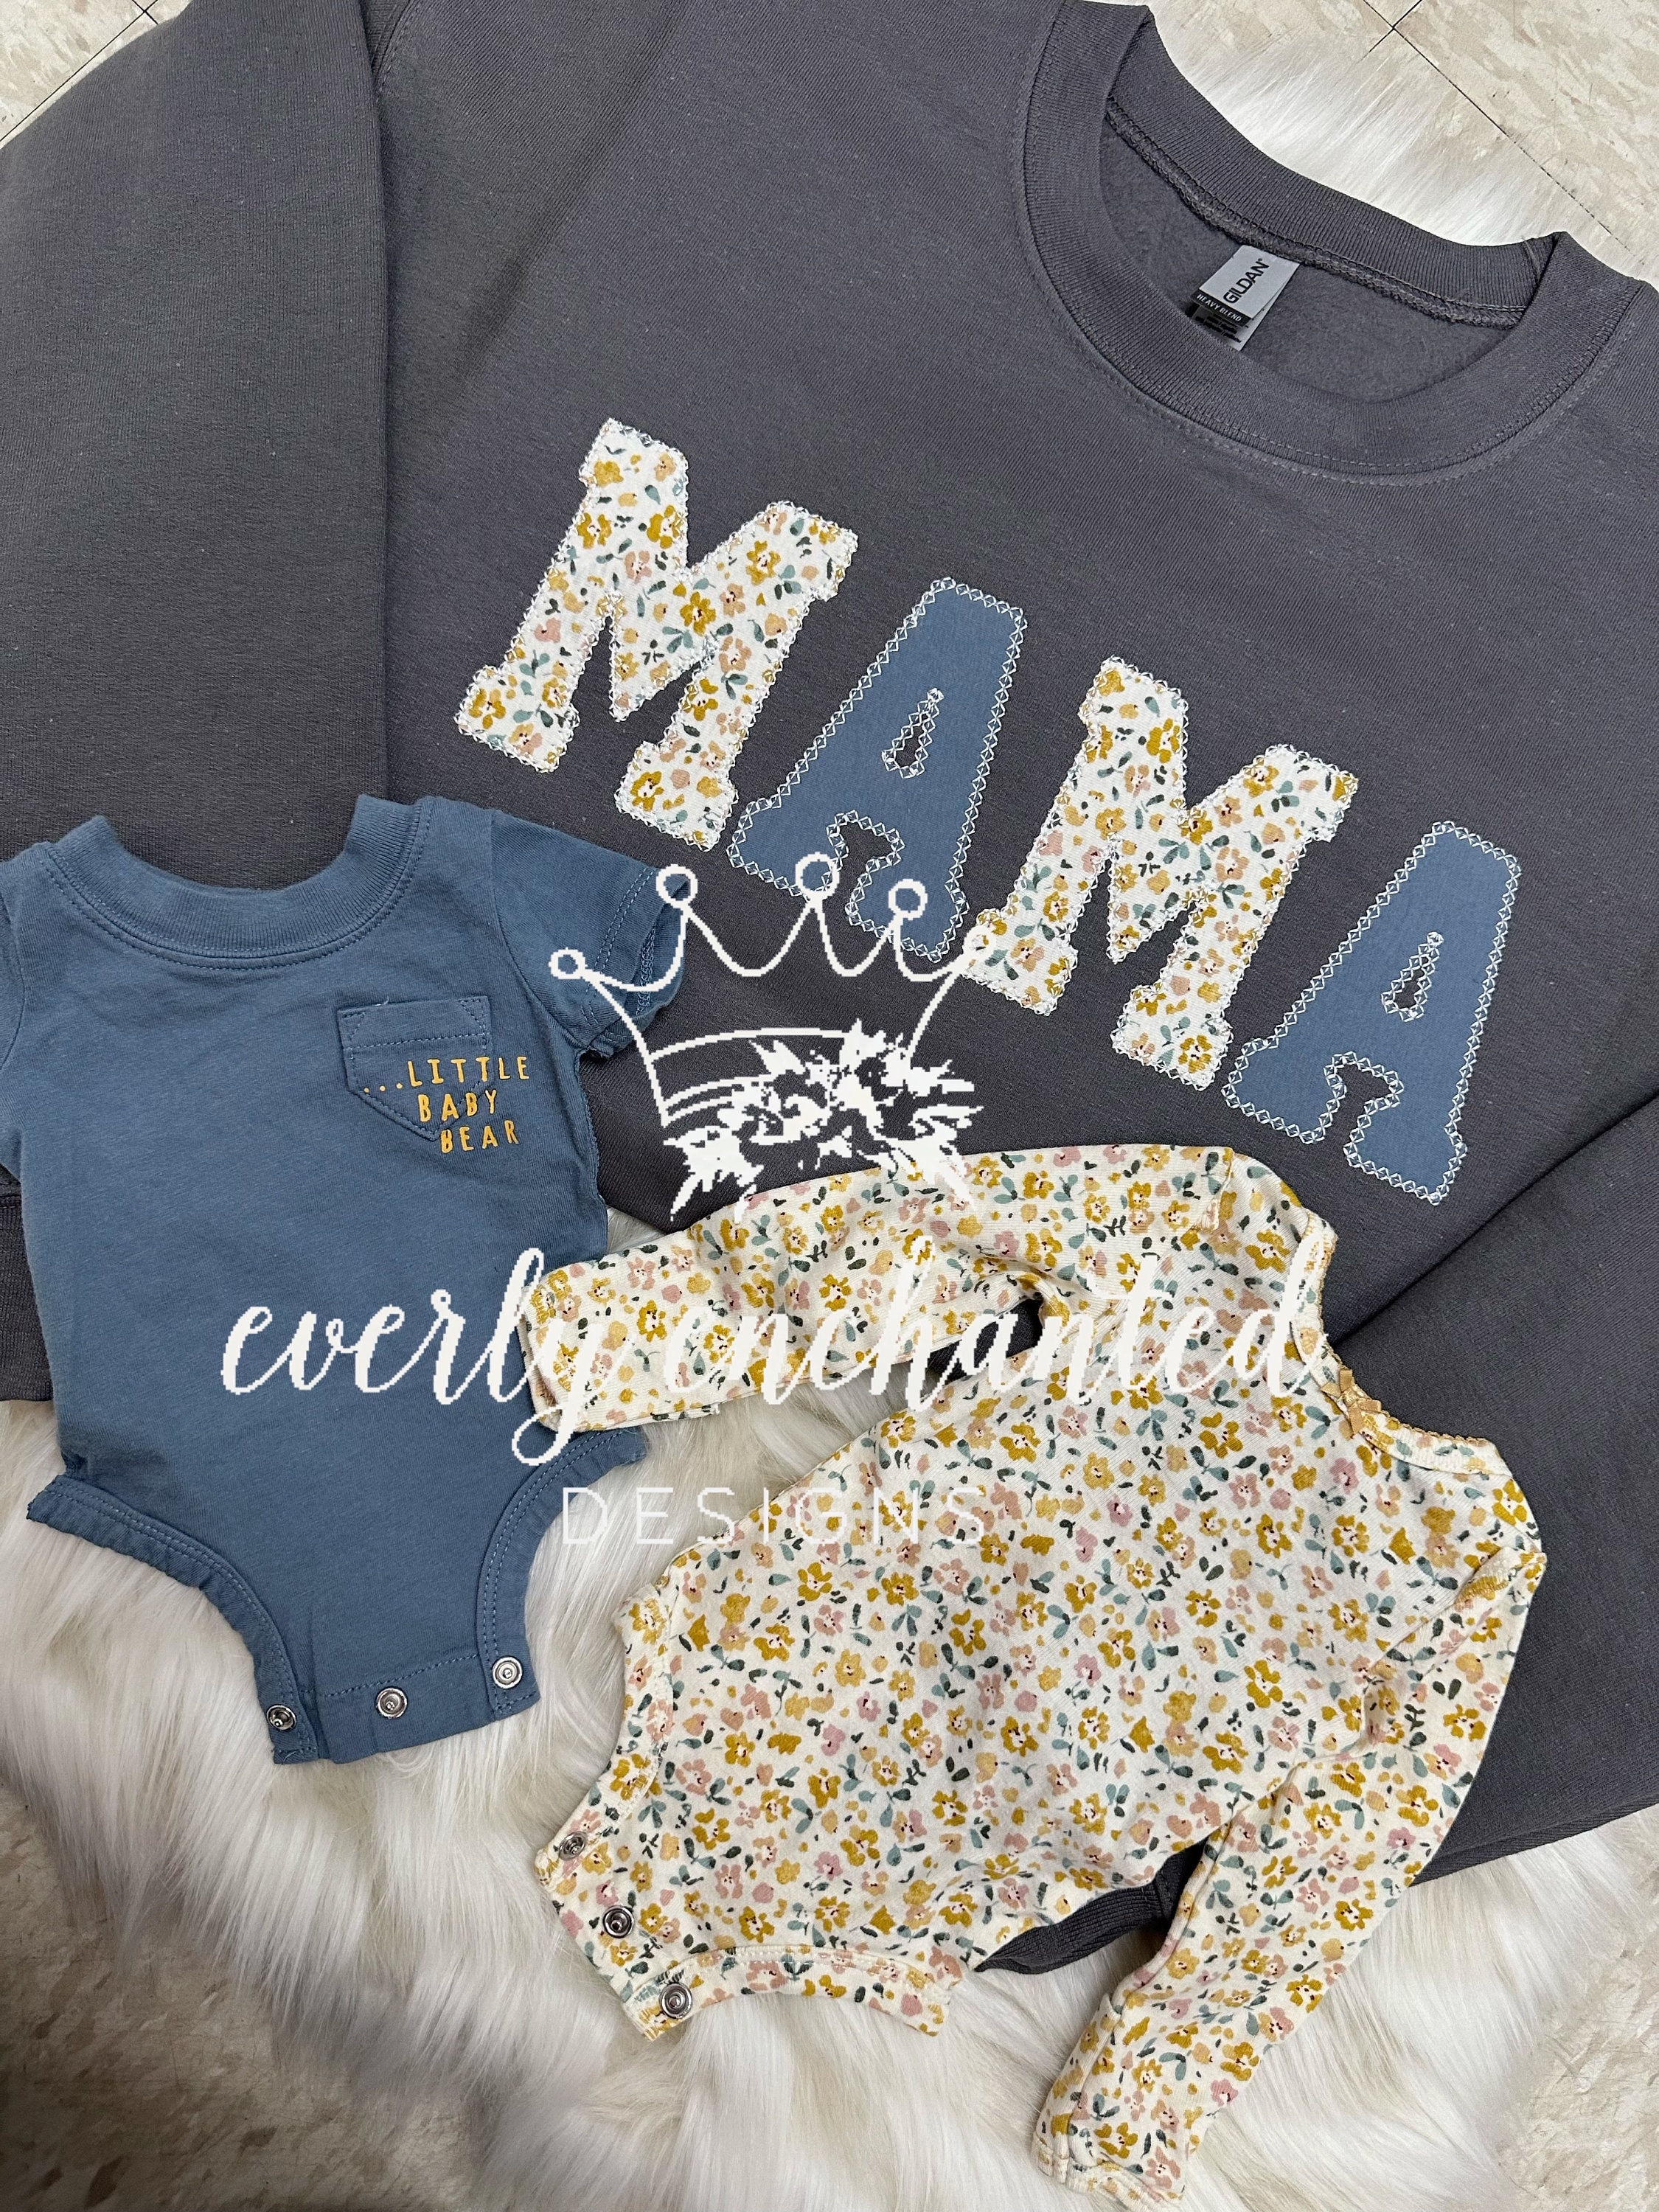 Mama Embroidered Baby Outfit Keepsake Applique Sweatshirt Simple